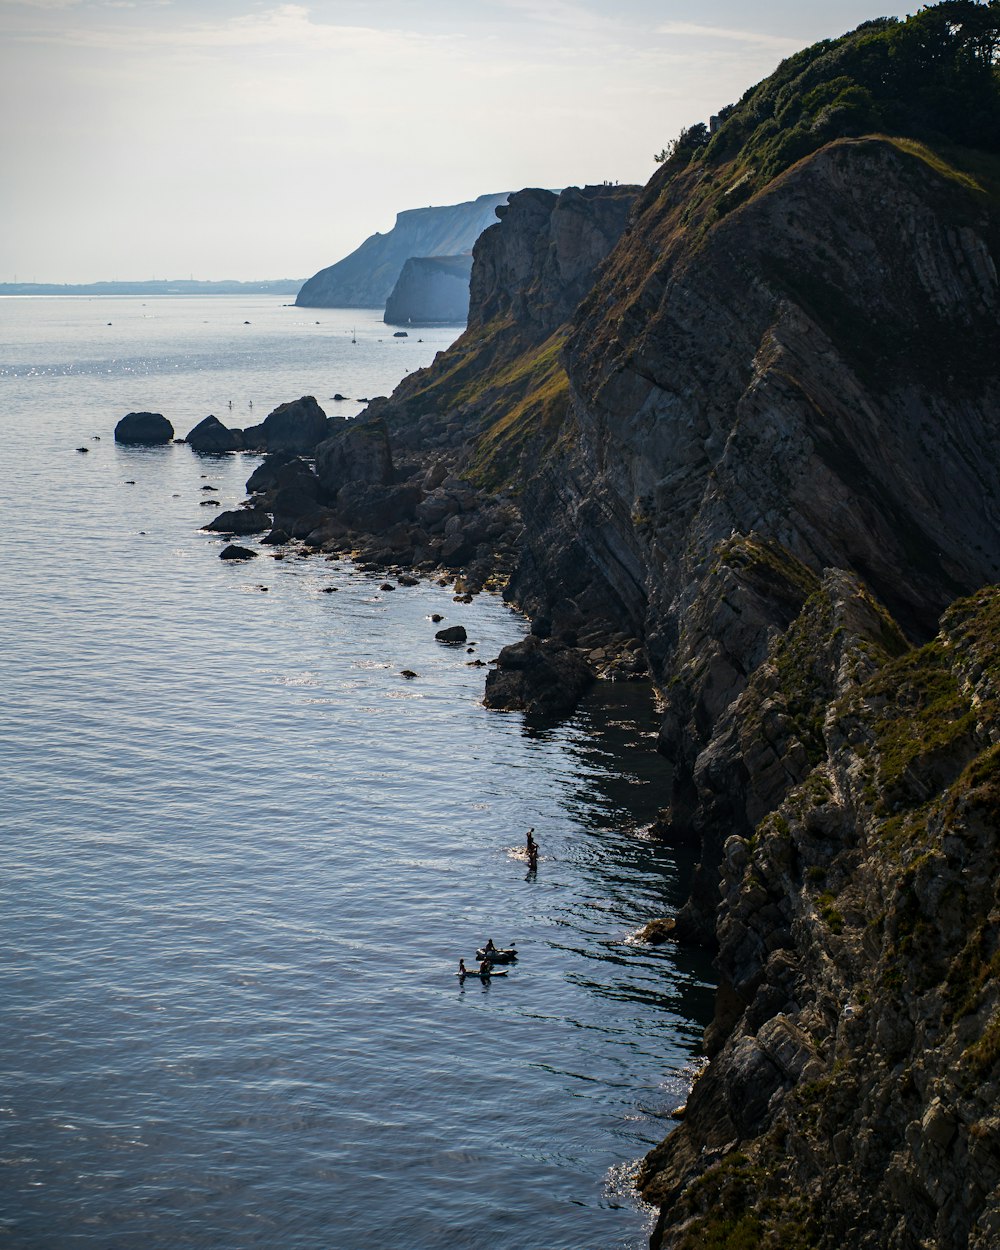 a group of people swimming in the ocean by a cliff